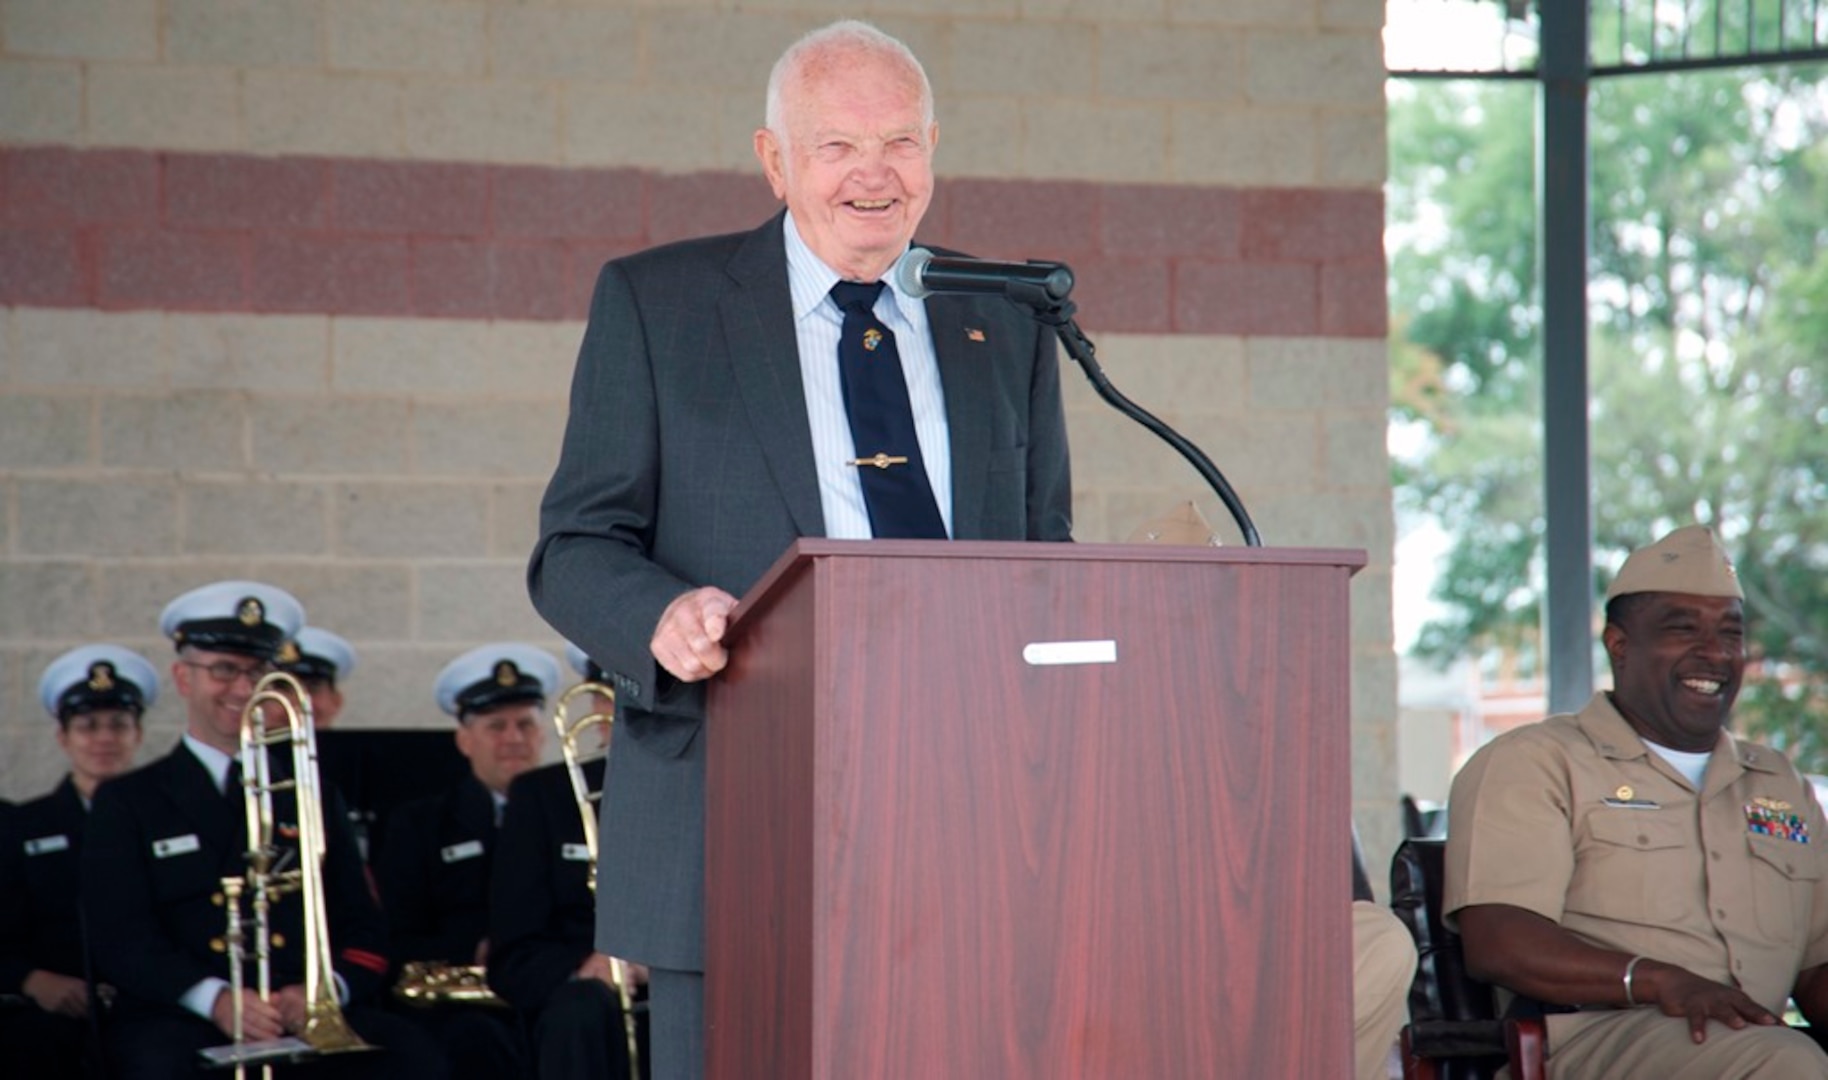 IMAGE: DAHLGREN, Va. (Oct. 16, 2017) – Jim Colvard – Naval Surface Warfare Center Dahlgren Division Technical Director from 1973 to 1980 – gives his keynote speech before the military and civilian audience gathered to celebrate the Navy base’s centennial.  “Today’s problems cannot be solved by yesterday’s solutions,” said Colvard. “So you’ve got to be constantly looking at new ways to do things and approach a problem.”